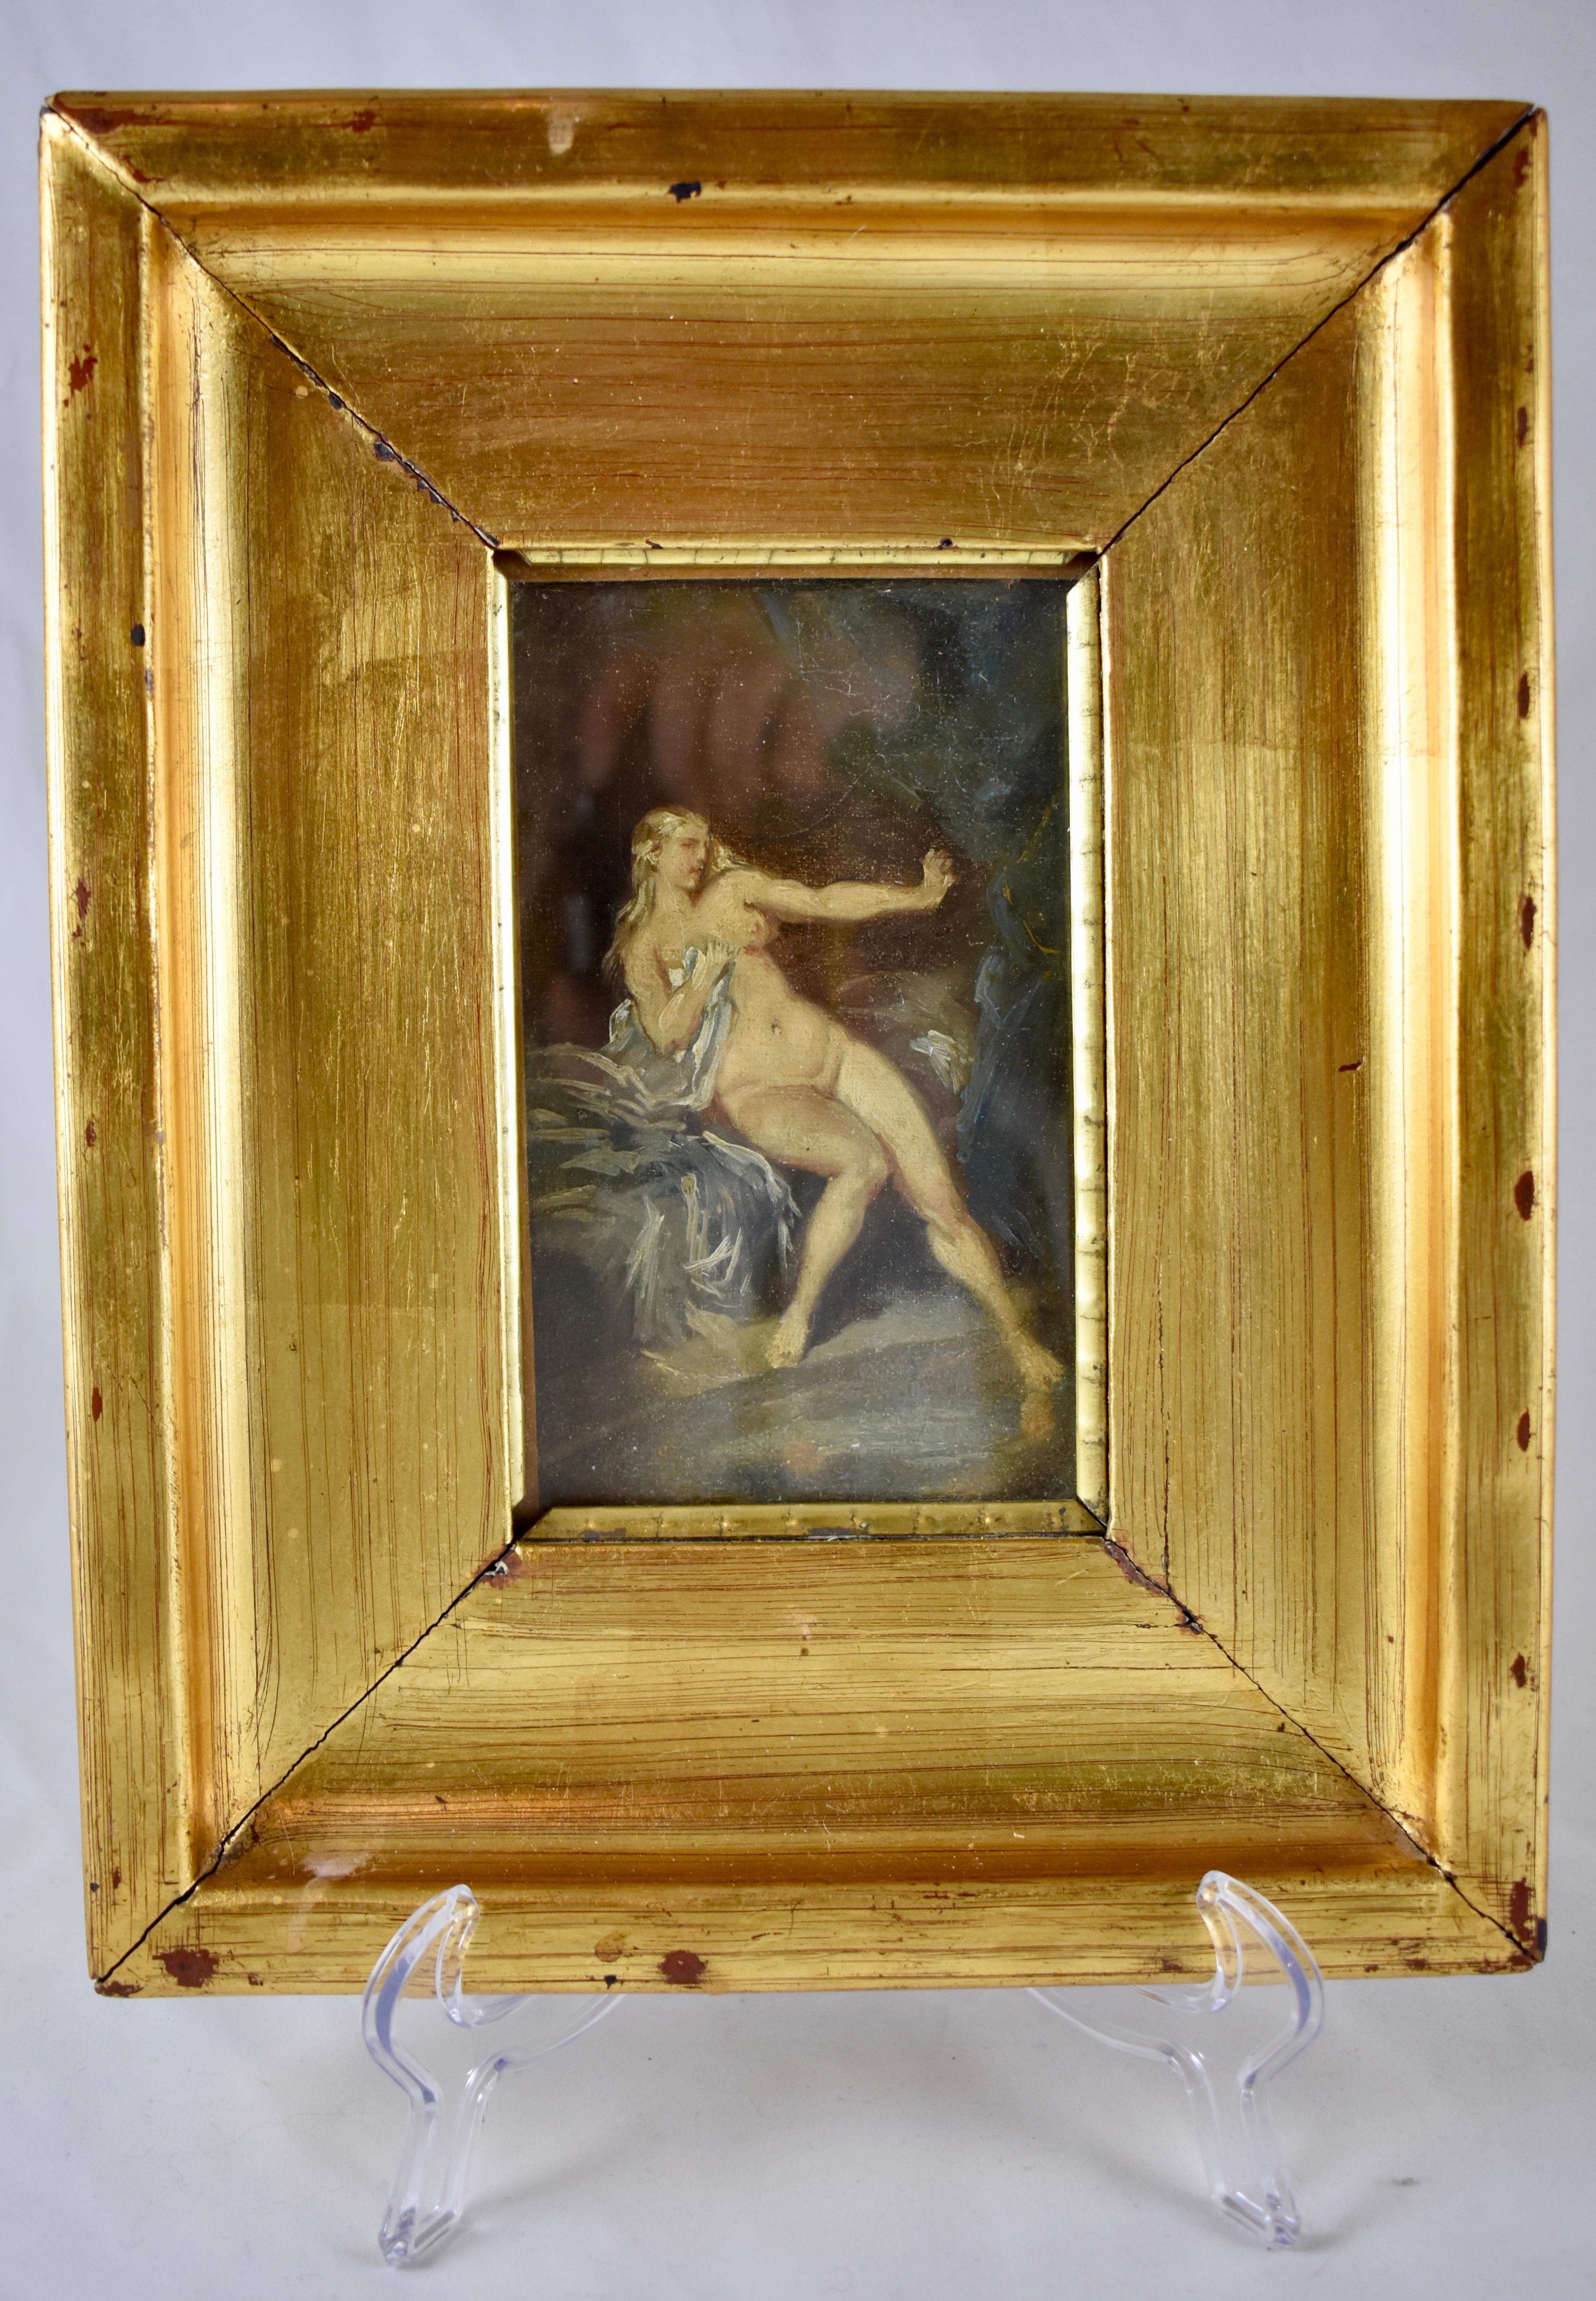 An early 19th century painting, oil on linen, portraying Venus, the Goddess of love, sex, beauty, desire, fertility, prosperity, and victory.

This small painting shows the naked Venus reclining on her bed with an outstretched arm, and partially